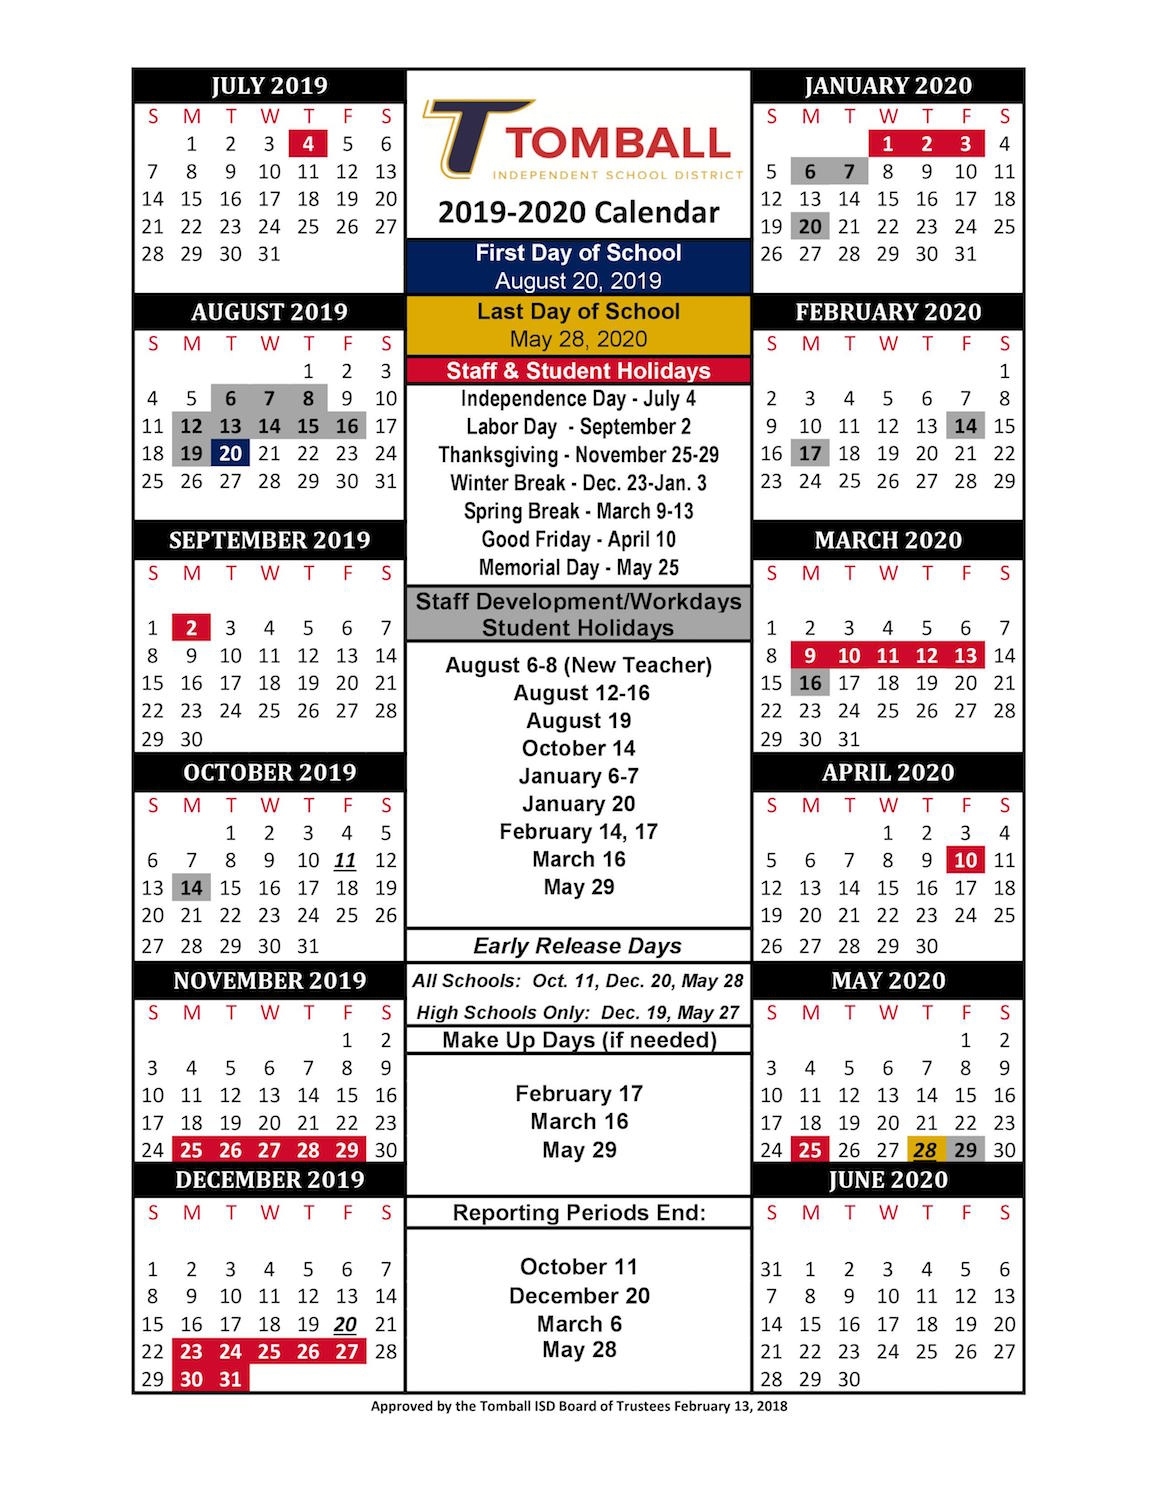 Take A Look At The 2019-20 Calendar For Tomball Isd Extraordinary School Calendar Tomball Isd